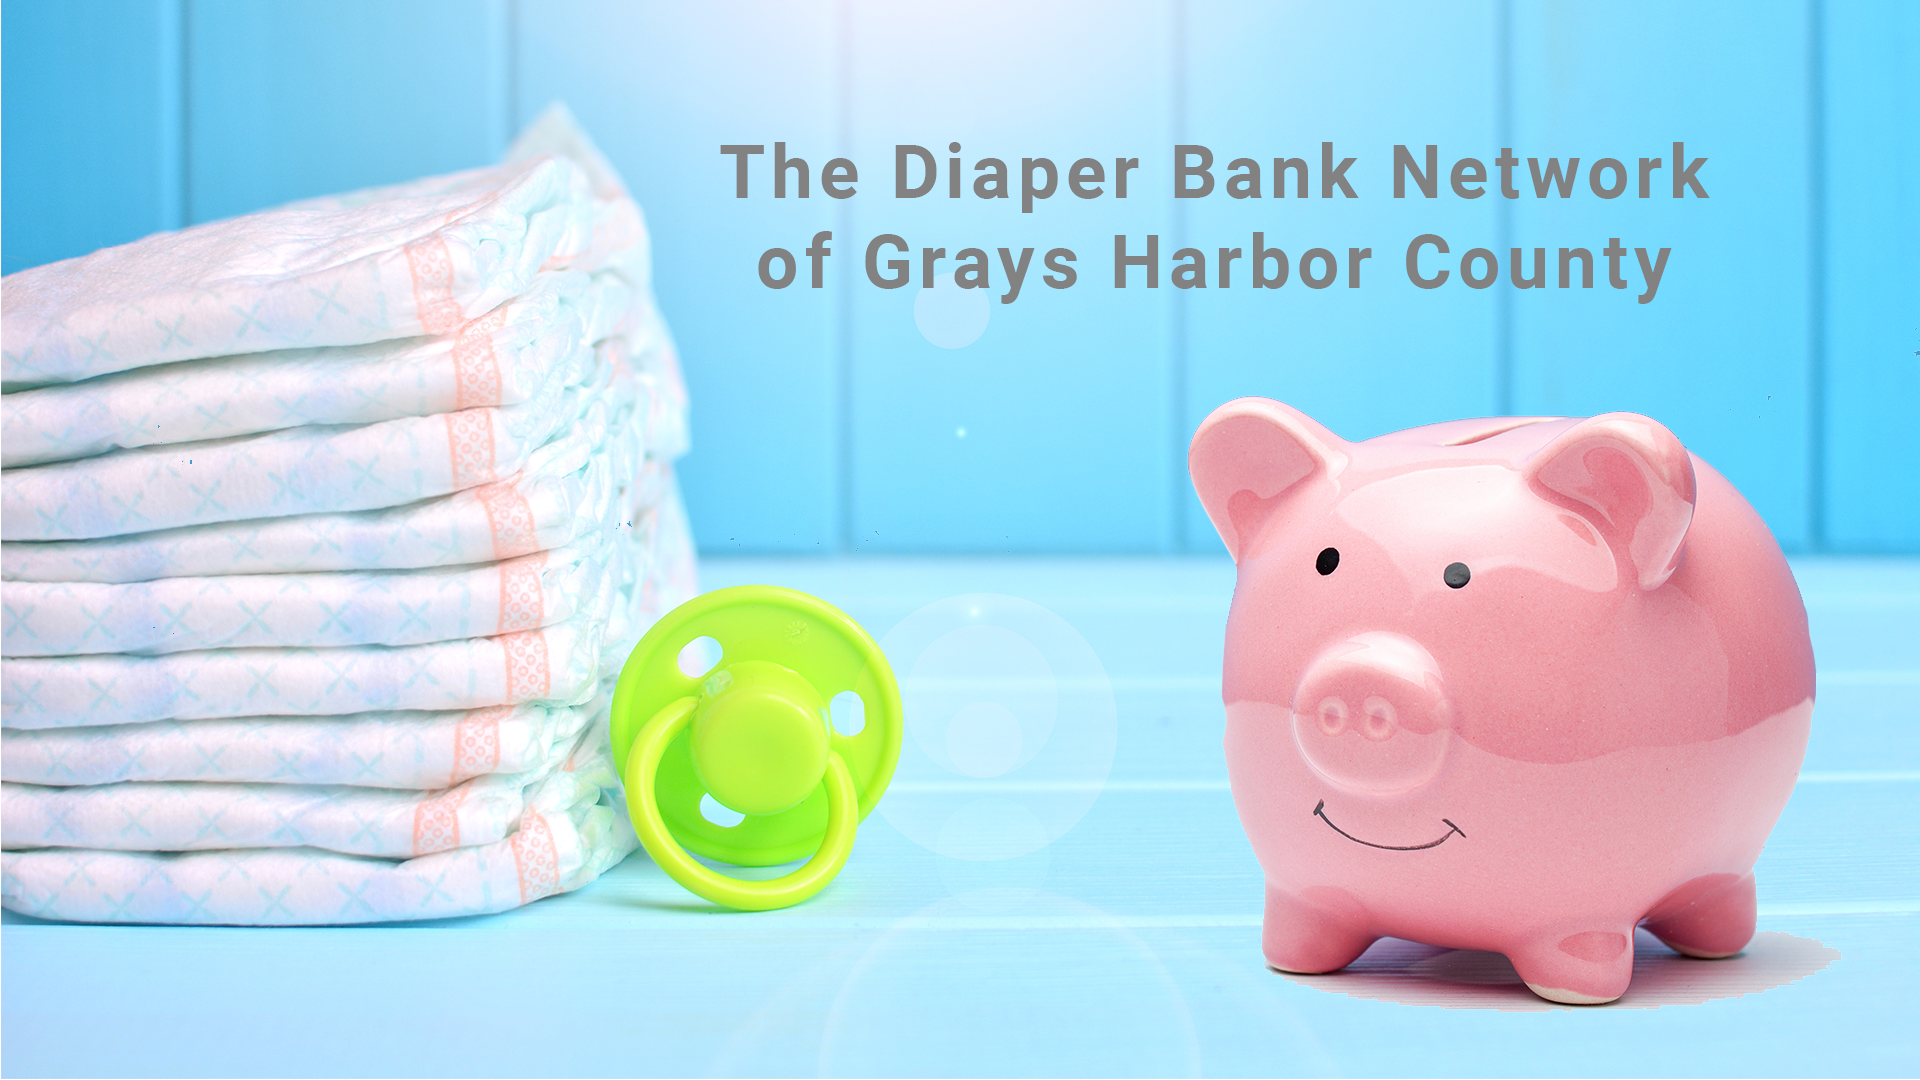 Learn more about the diaper bank